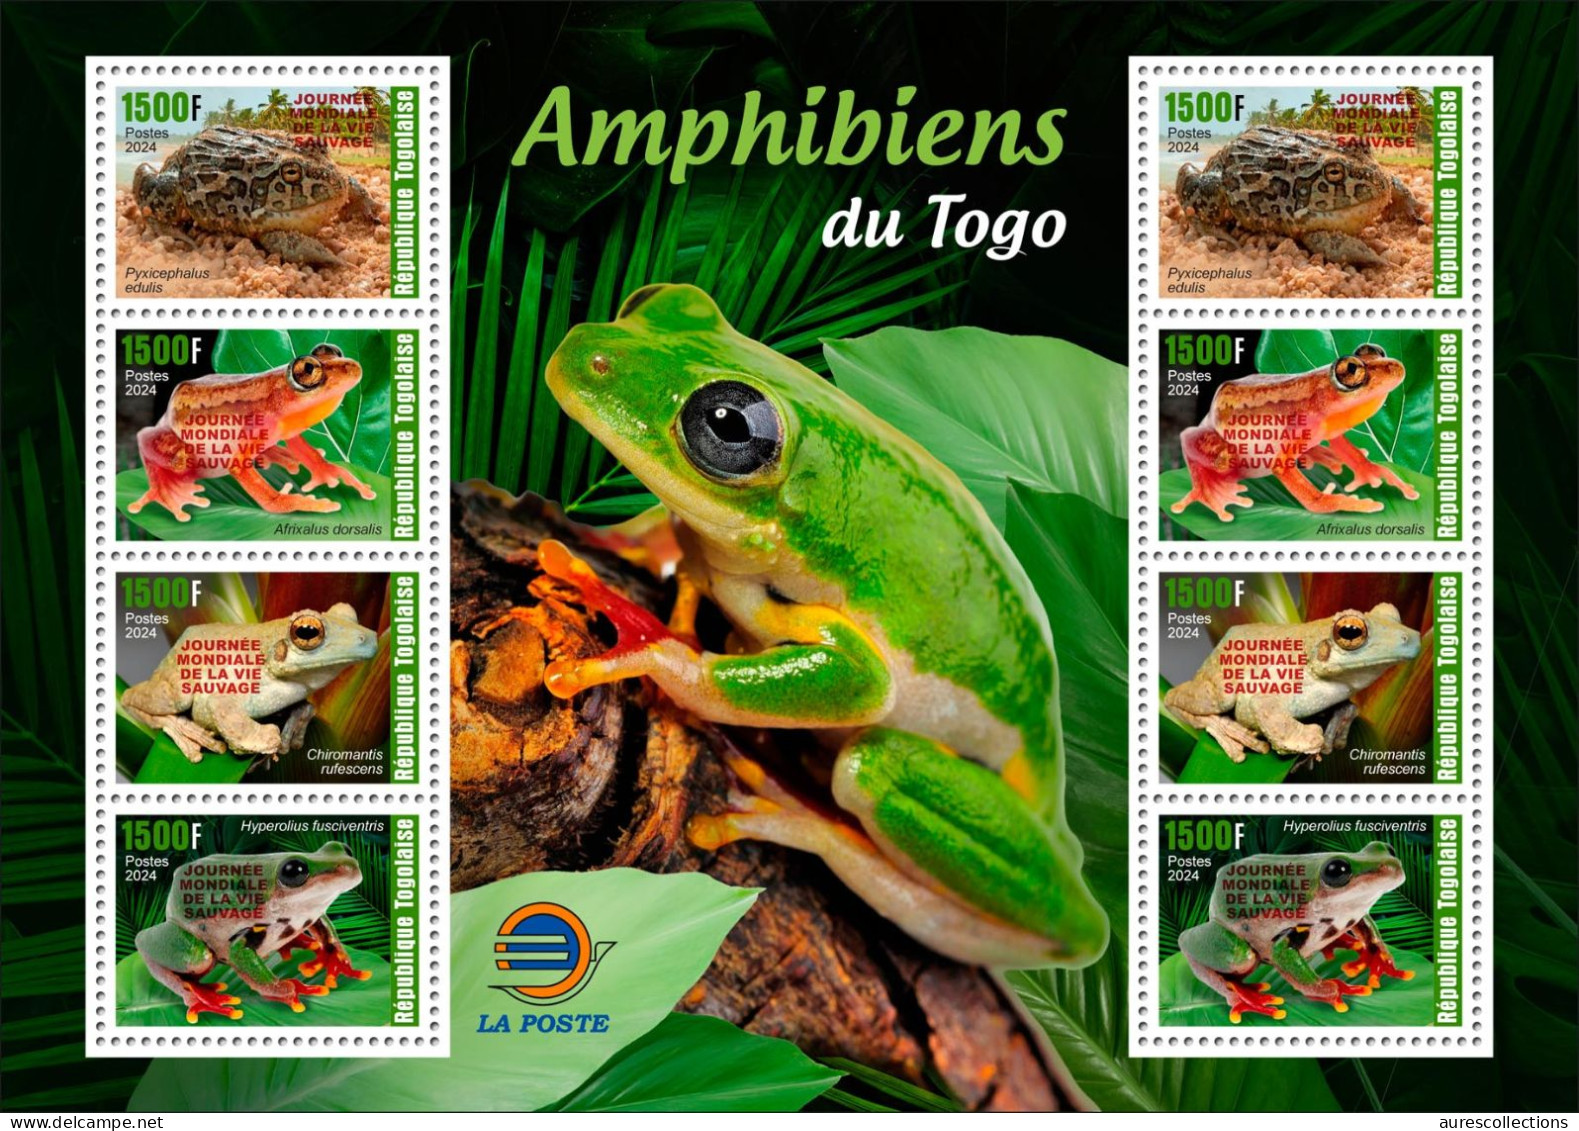 TOGO 2024 PACK OF 6 MS - REG & OVERPRINT - AMPHIBIANS & REPTILES - FROG FROGS TURTLE TURTLES SNAKES CROCODILE - MNH